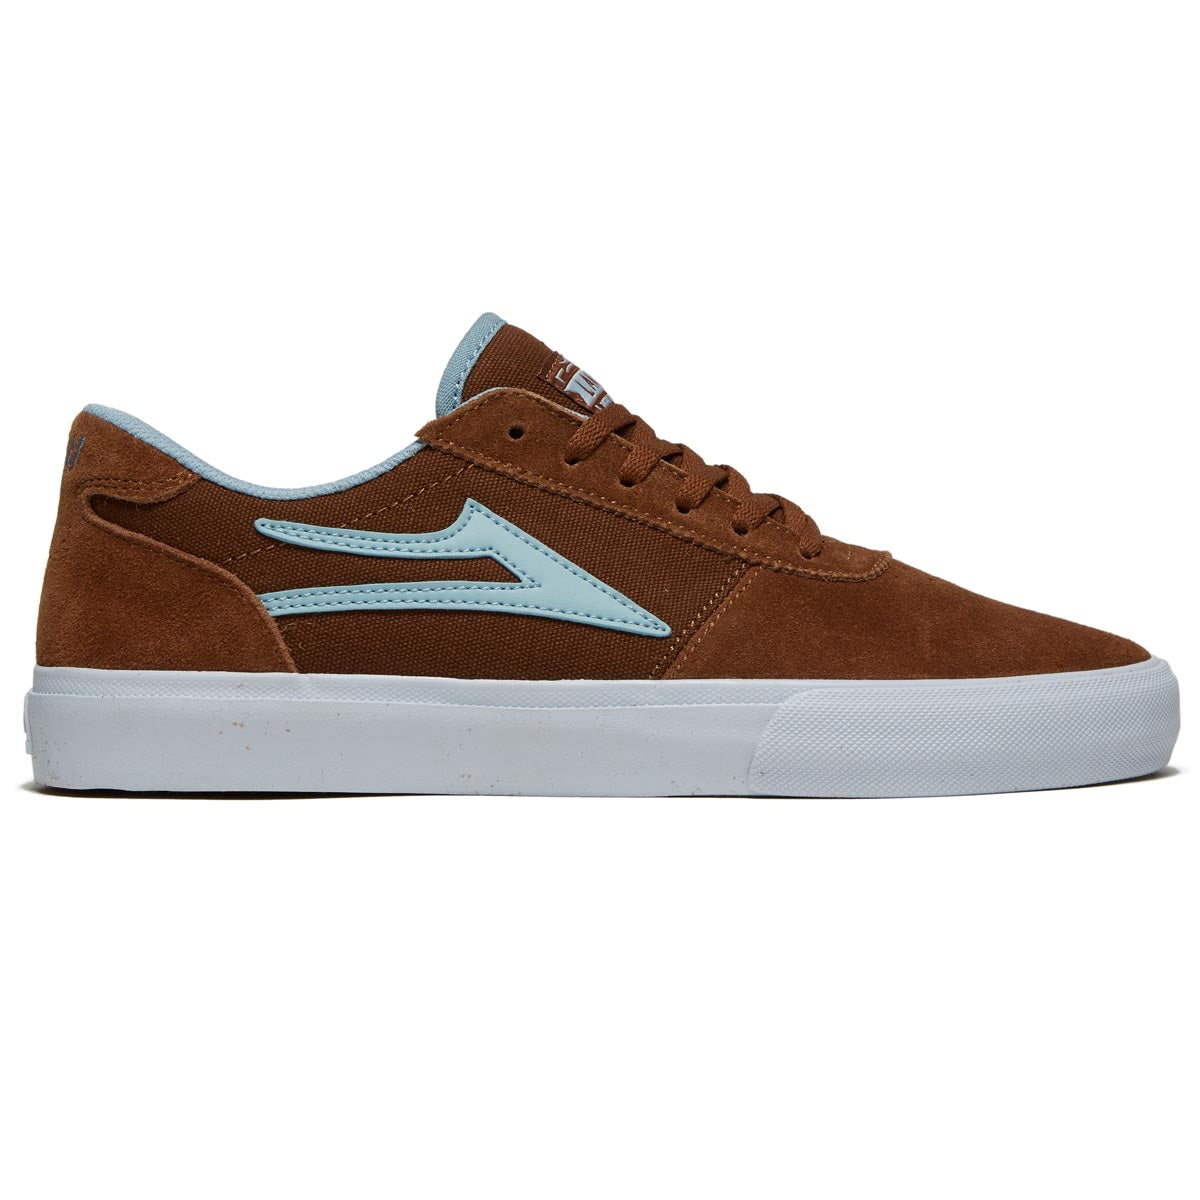 Lakai Manchester Shoes - Brown Suede image 1